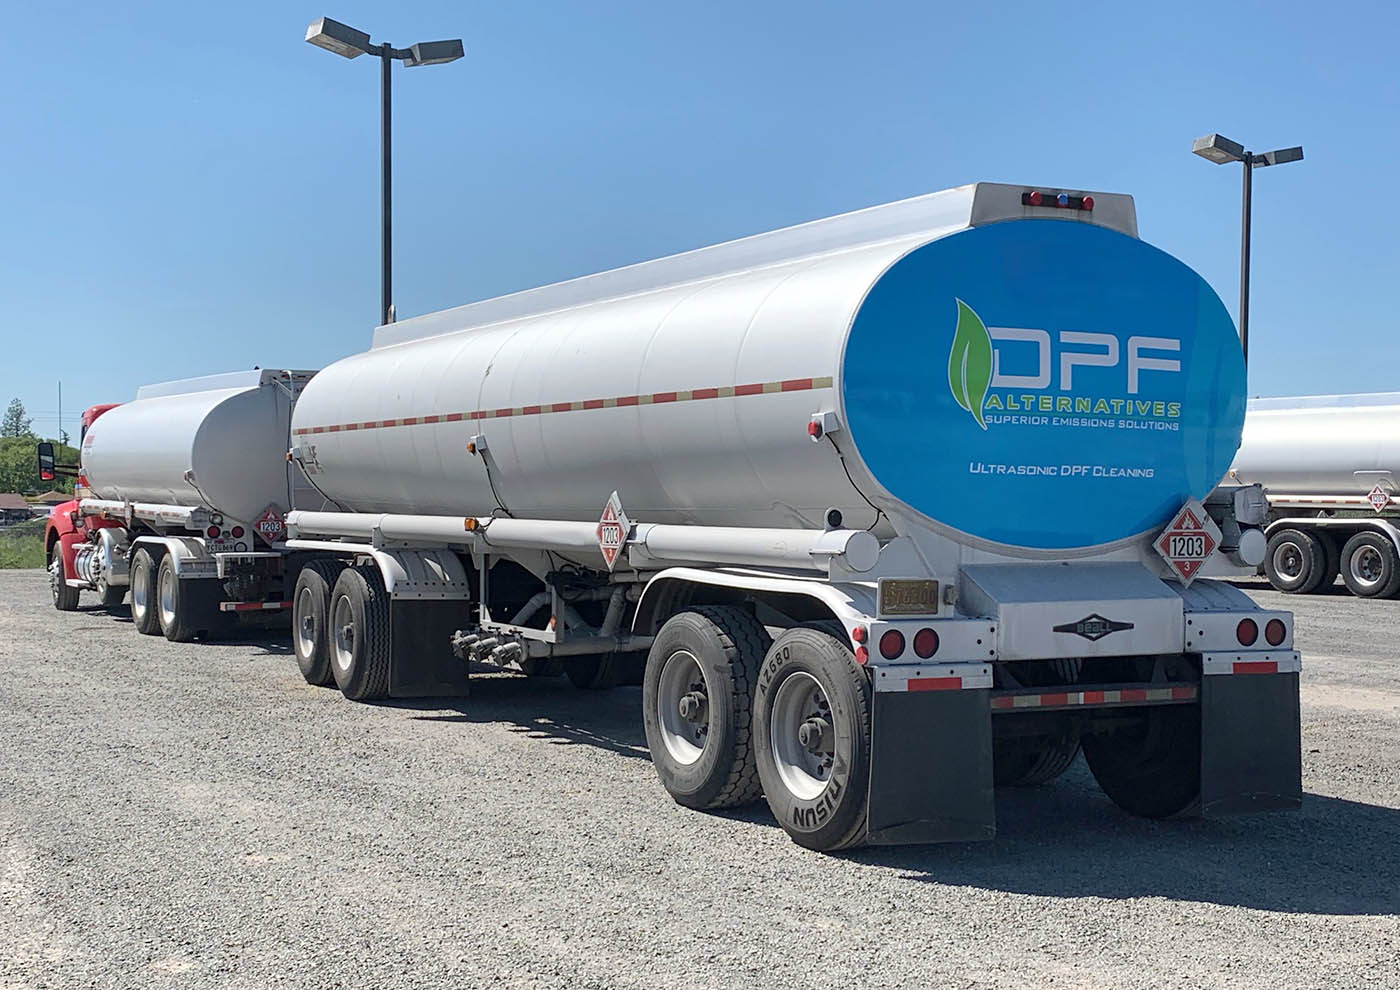 Back of a clean, large, reflective semi truck rig, contact DPF Alternatives for a DPF cleaning in Spokane-Coeur d'Alene, WA/ID.